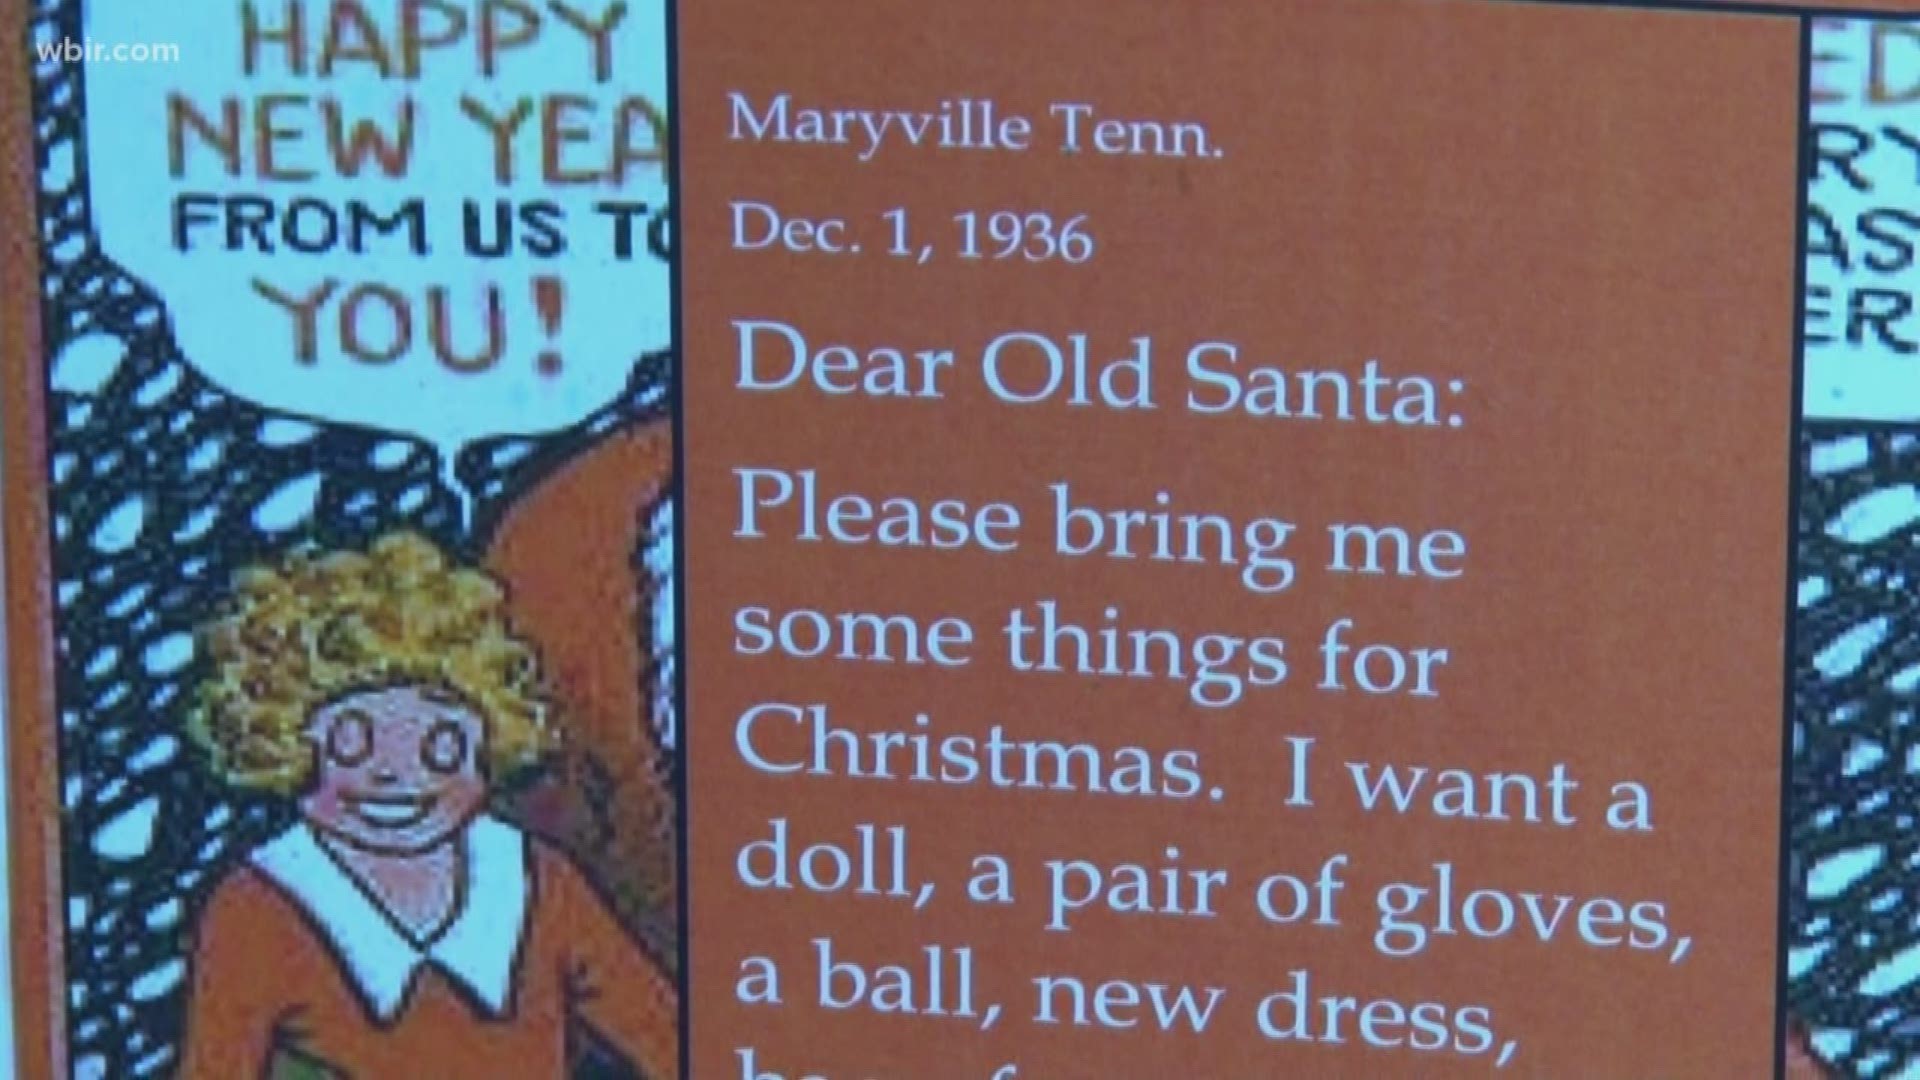 The Blount County Public Library has an exhibit that highlights letters to Santa Claus that were written in the 1930's. The letters were published in the newspaper and collected by a Maryville College librarian who kept them in a scrapbook. No one knows why she did it but the BCPL is thrilled she did. Dec. 17, 2018-4pm